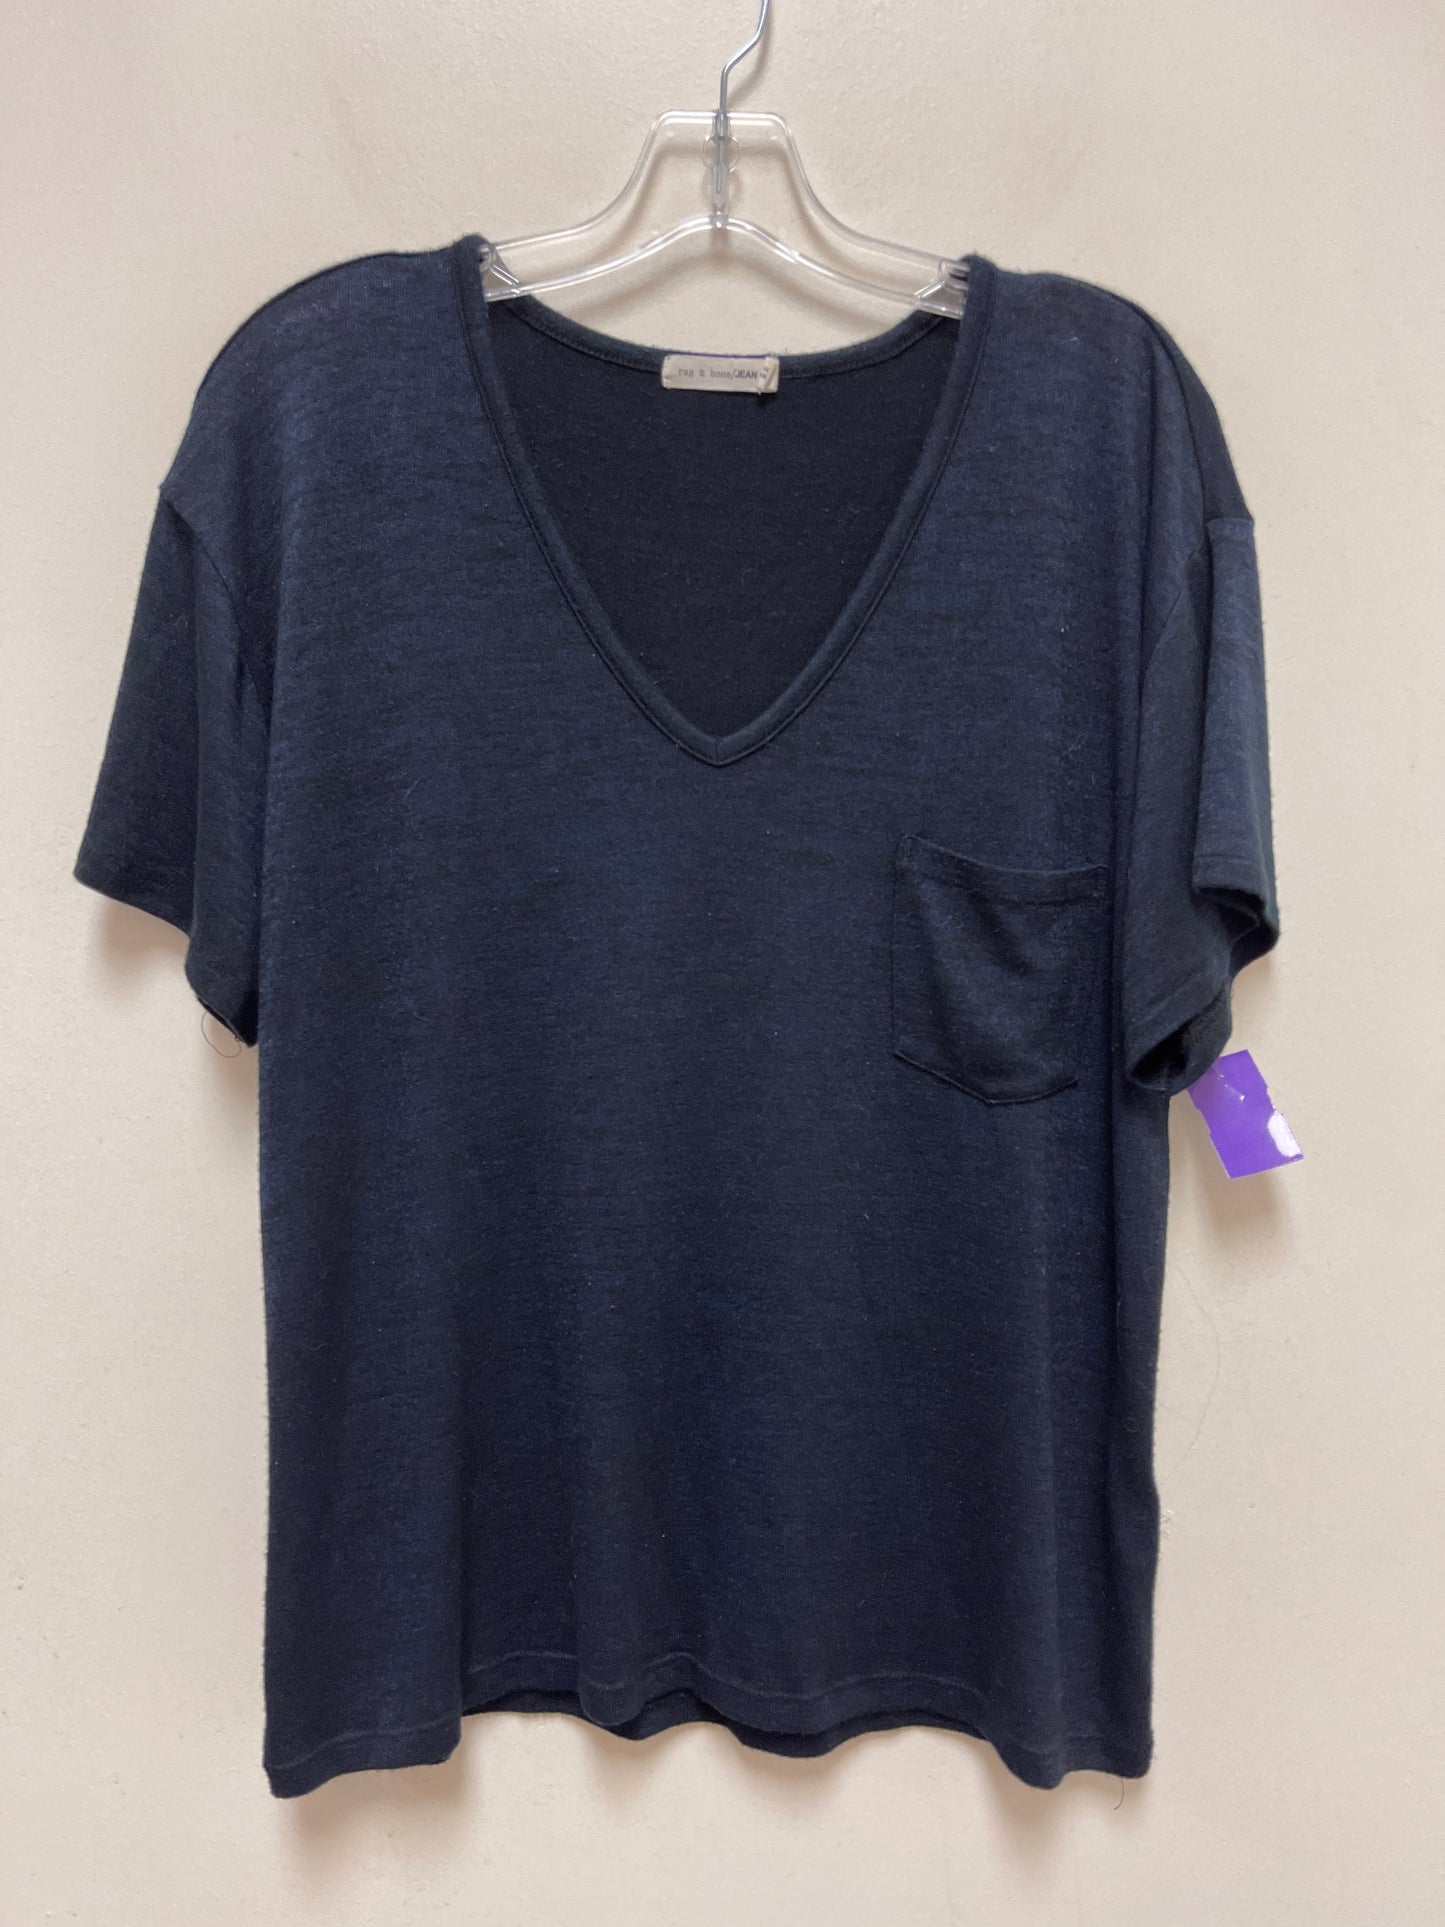 Navy Top Short Sleeve Rag And Bone, Size L